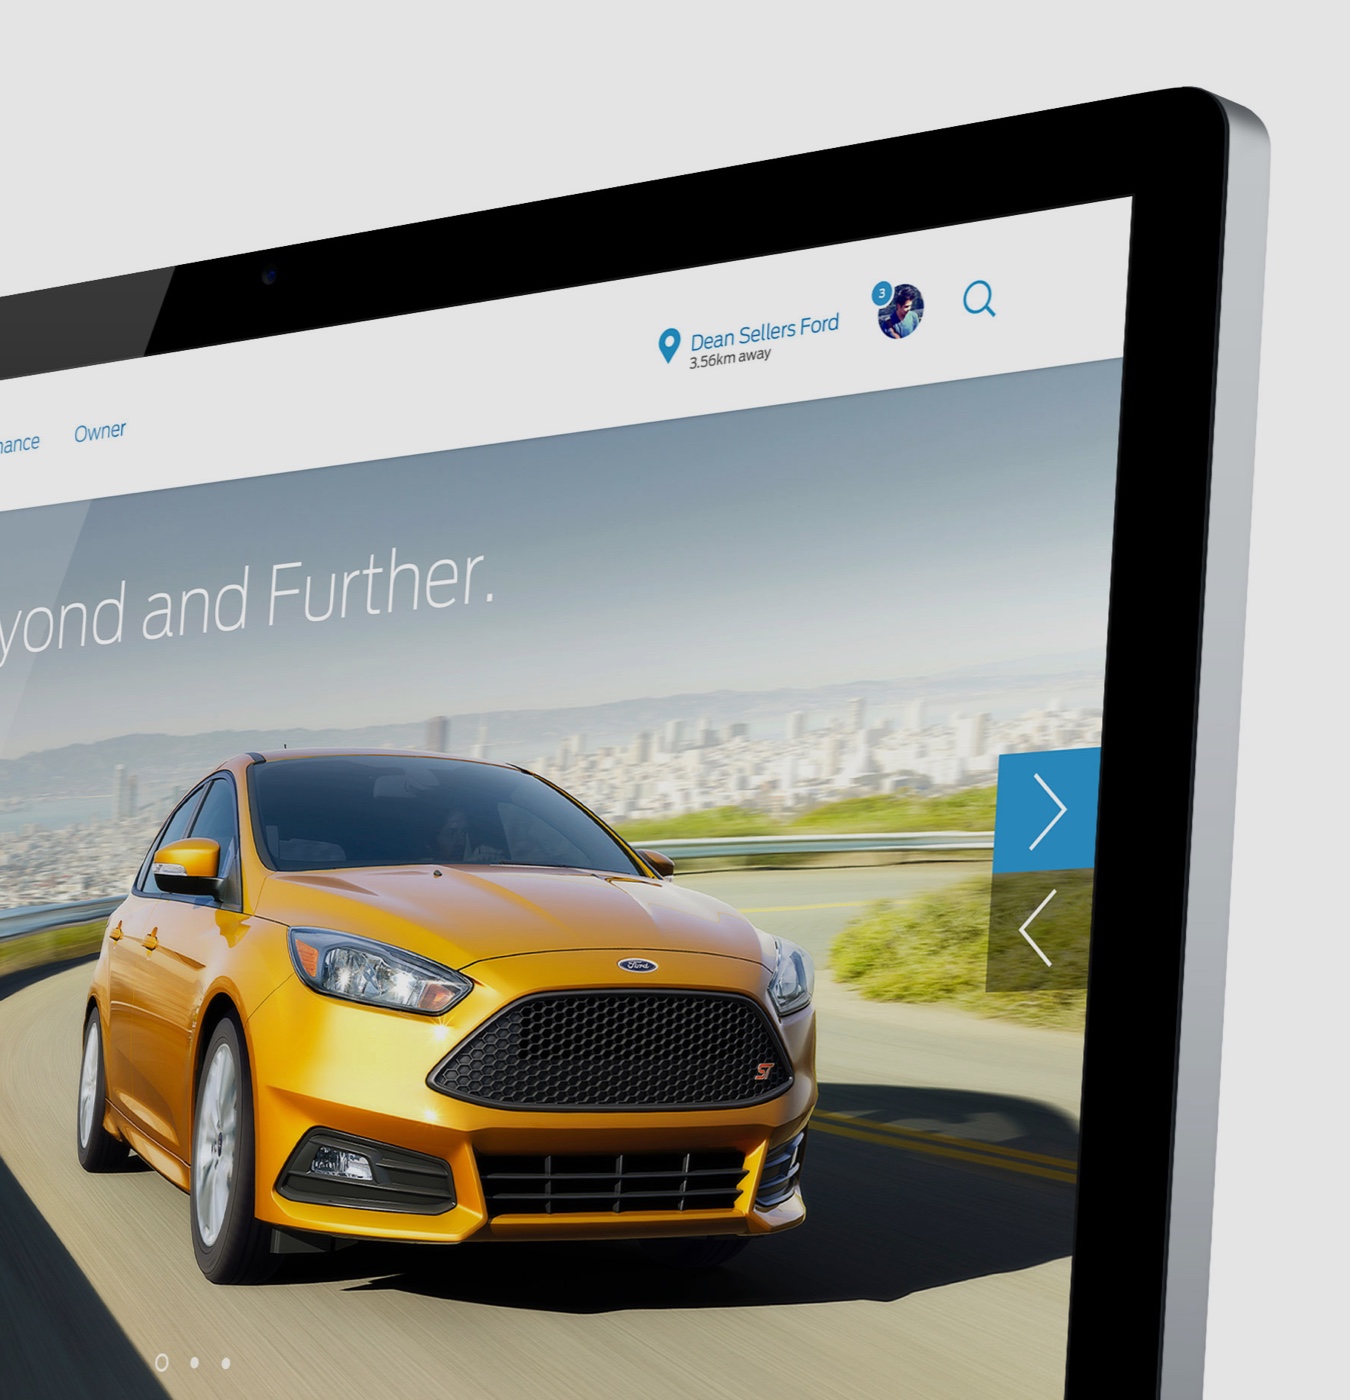 Ford.com Global Redesign